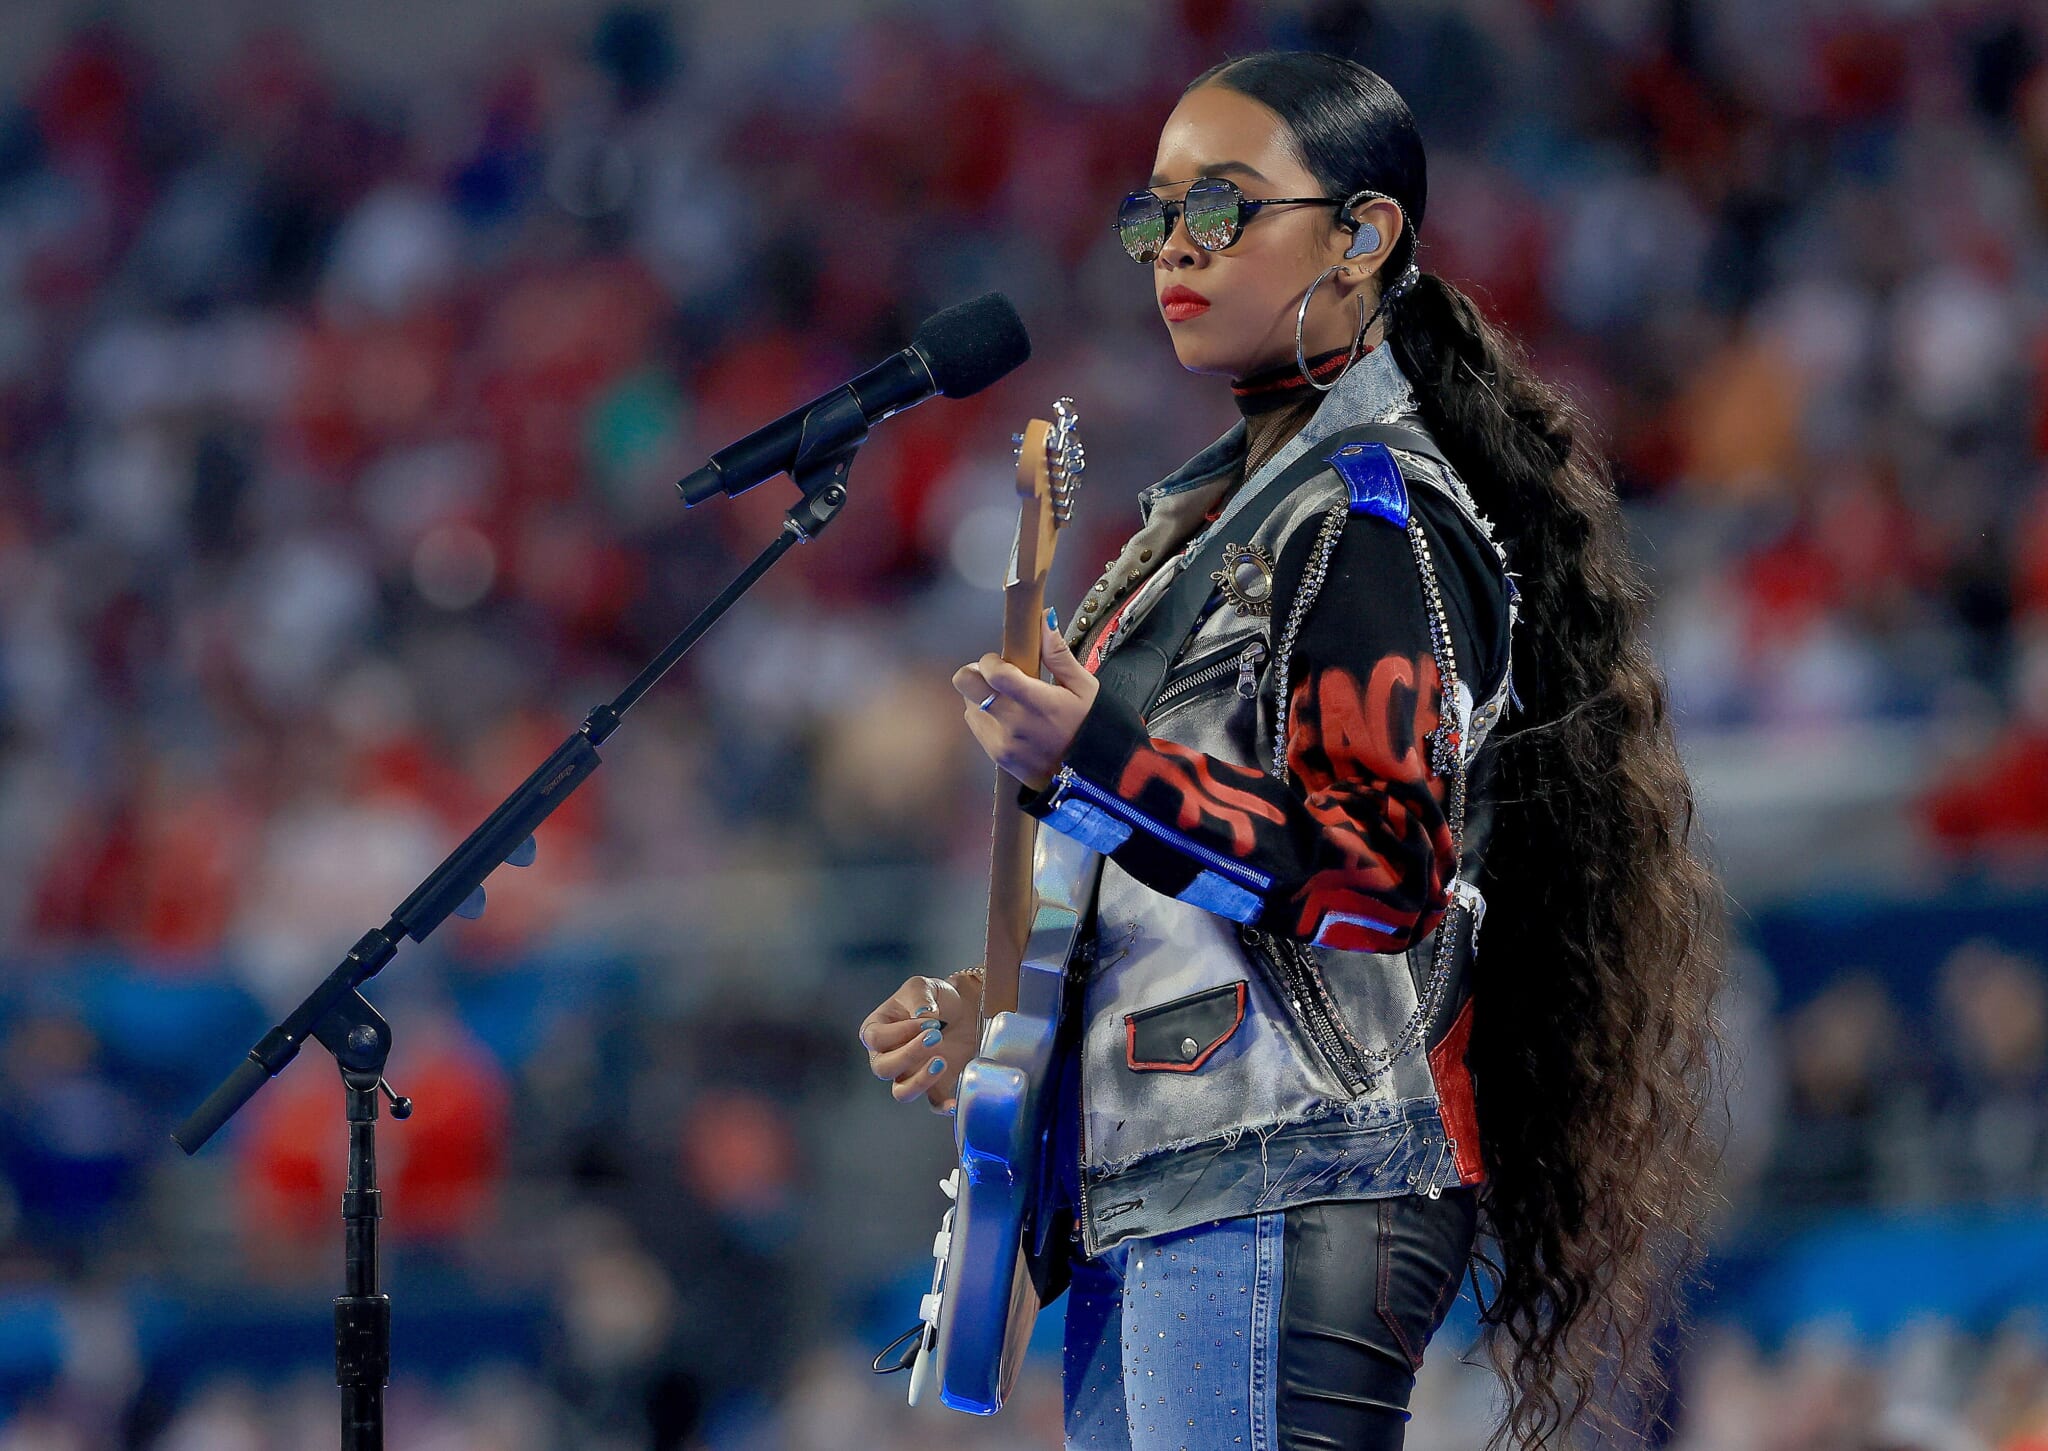 H.E.R. to perform at Global Citizens’ Vax Live: The Concert to Reunite the World